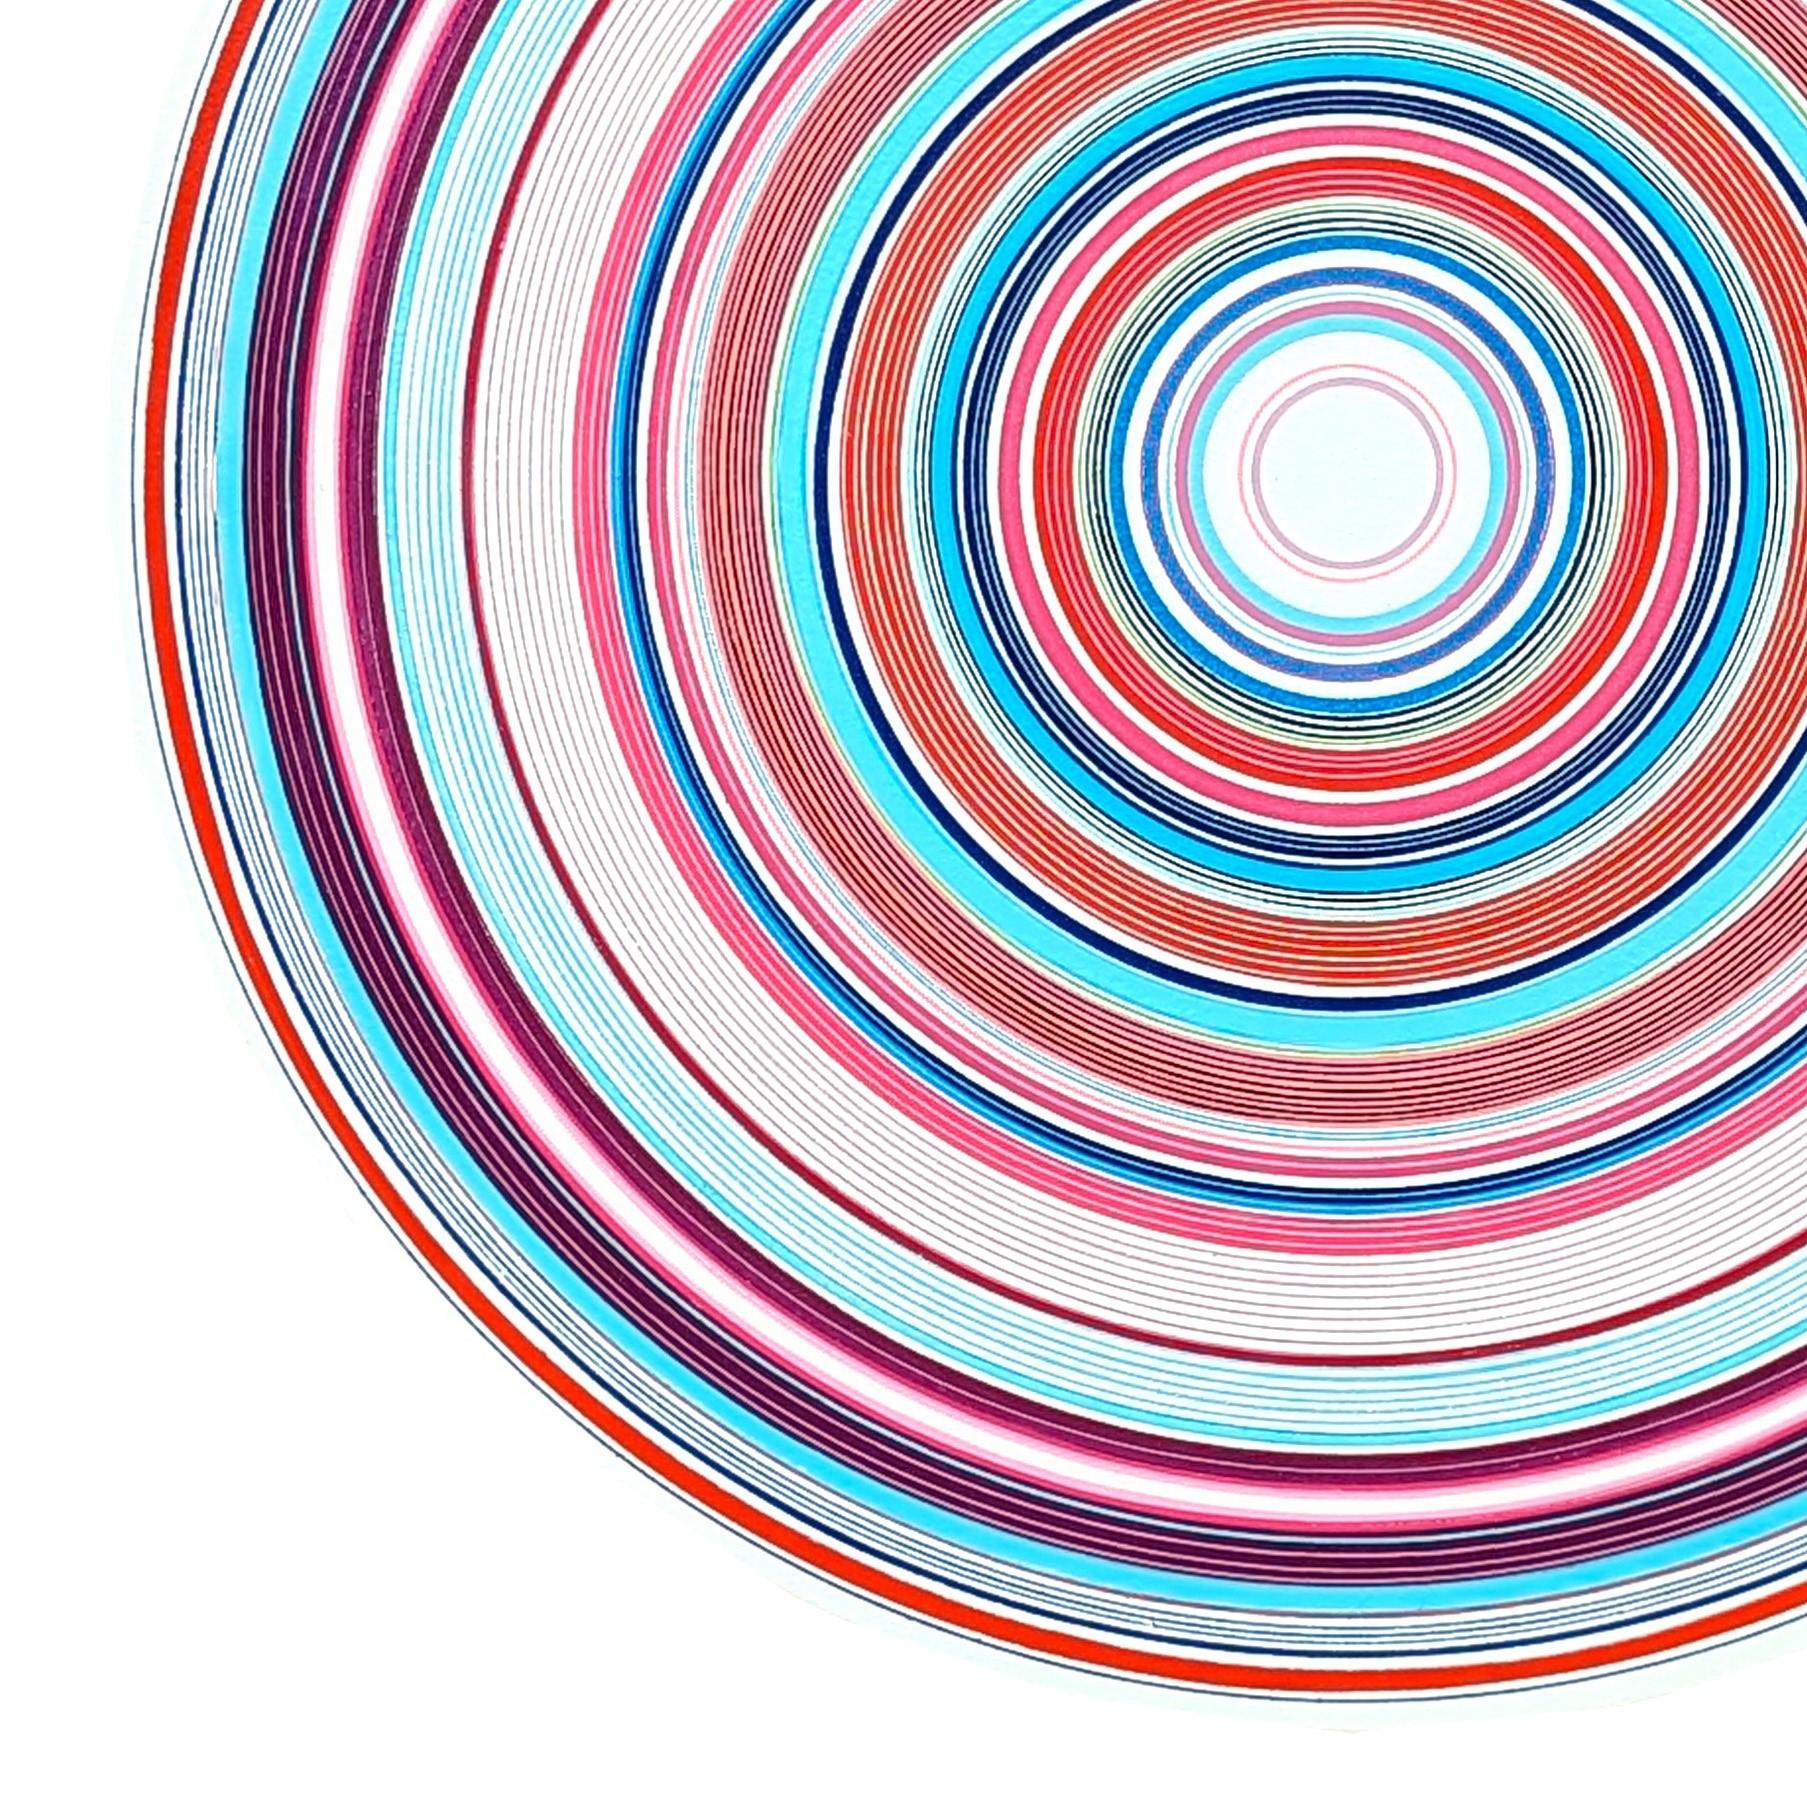 “Midnight Sun” Contemporary Pink, Blue, and Red Concentric Circle Painting 2